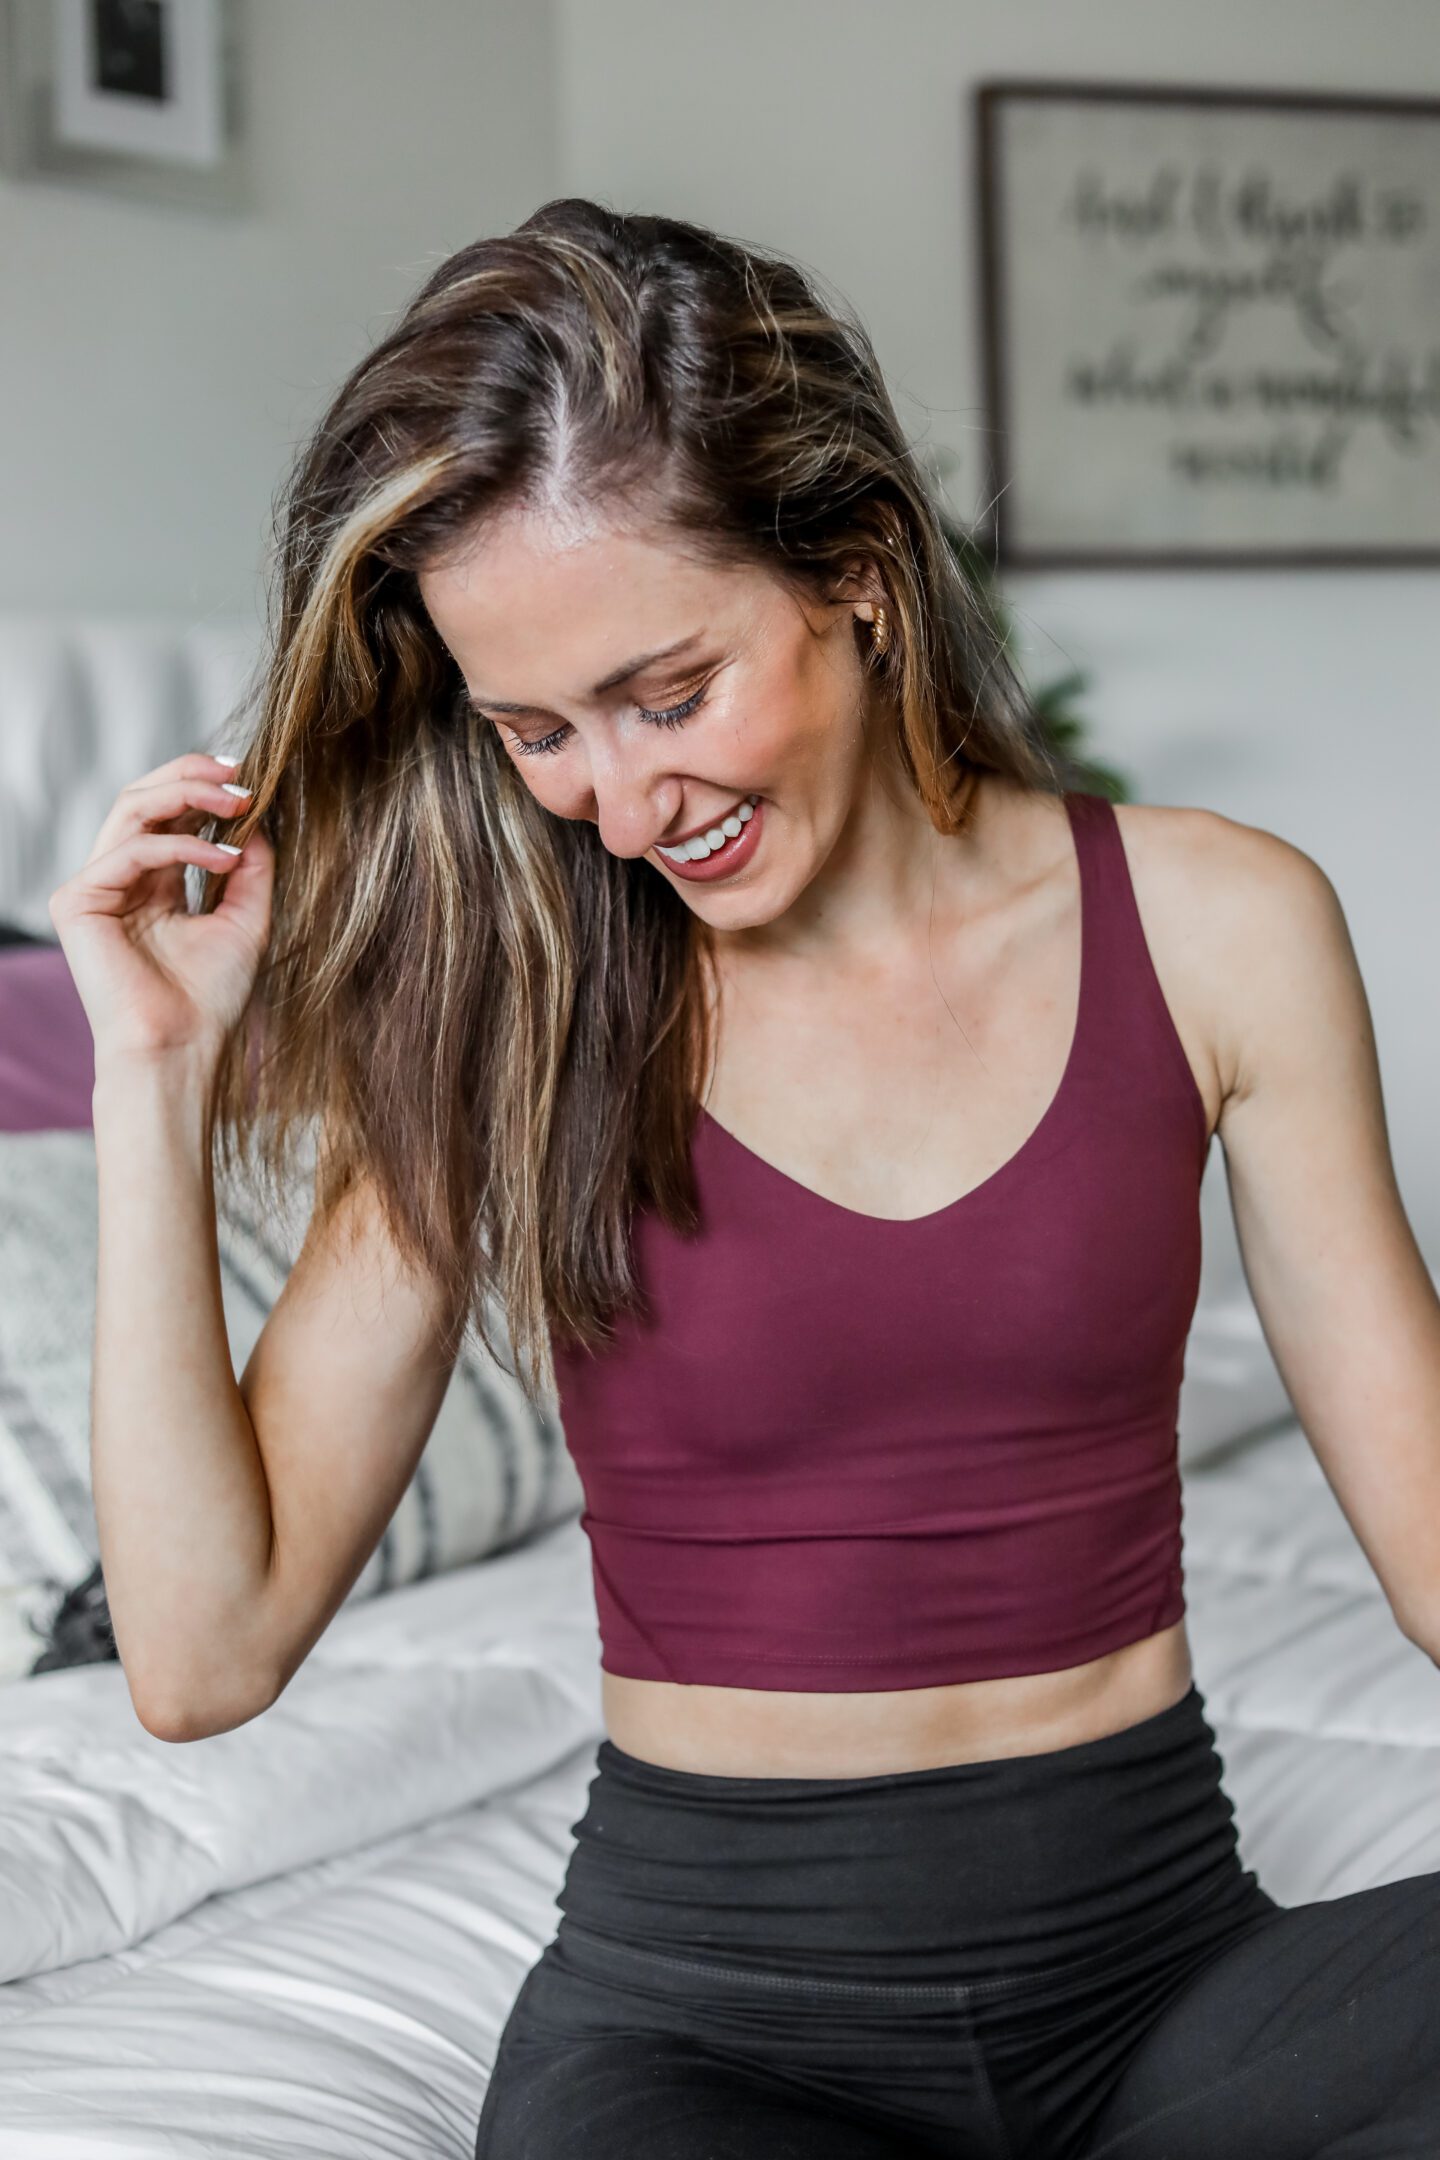 Lululemon Align DUPE workout top - COOL SH*T I LOVELOVELOVE - Monthly Favorites, August 2022 on Coming Up Roses